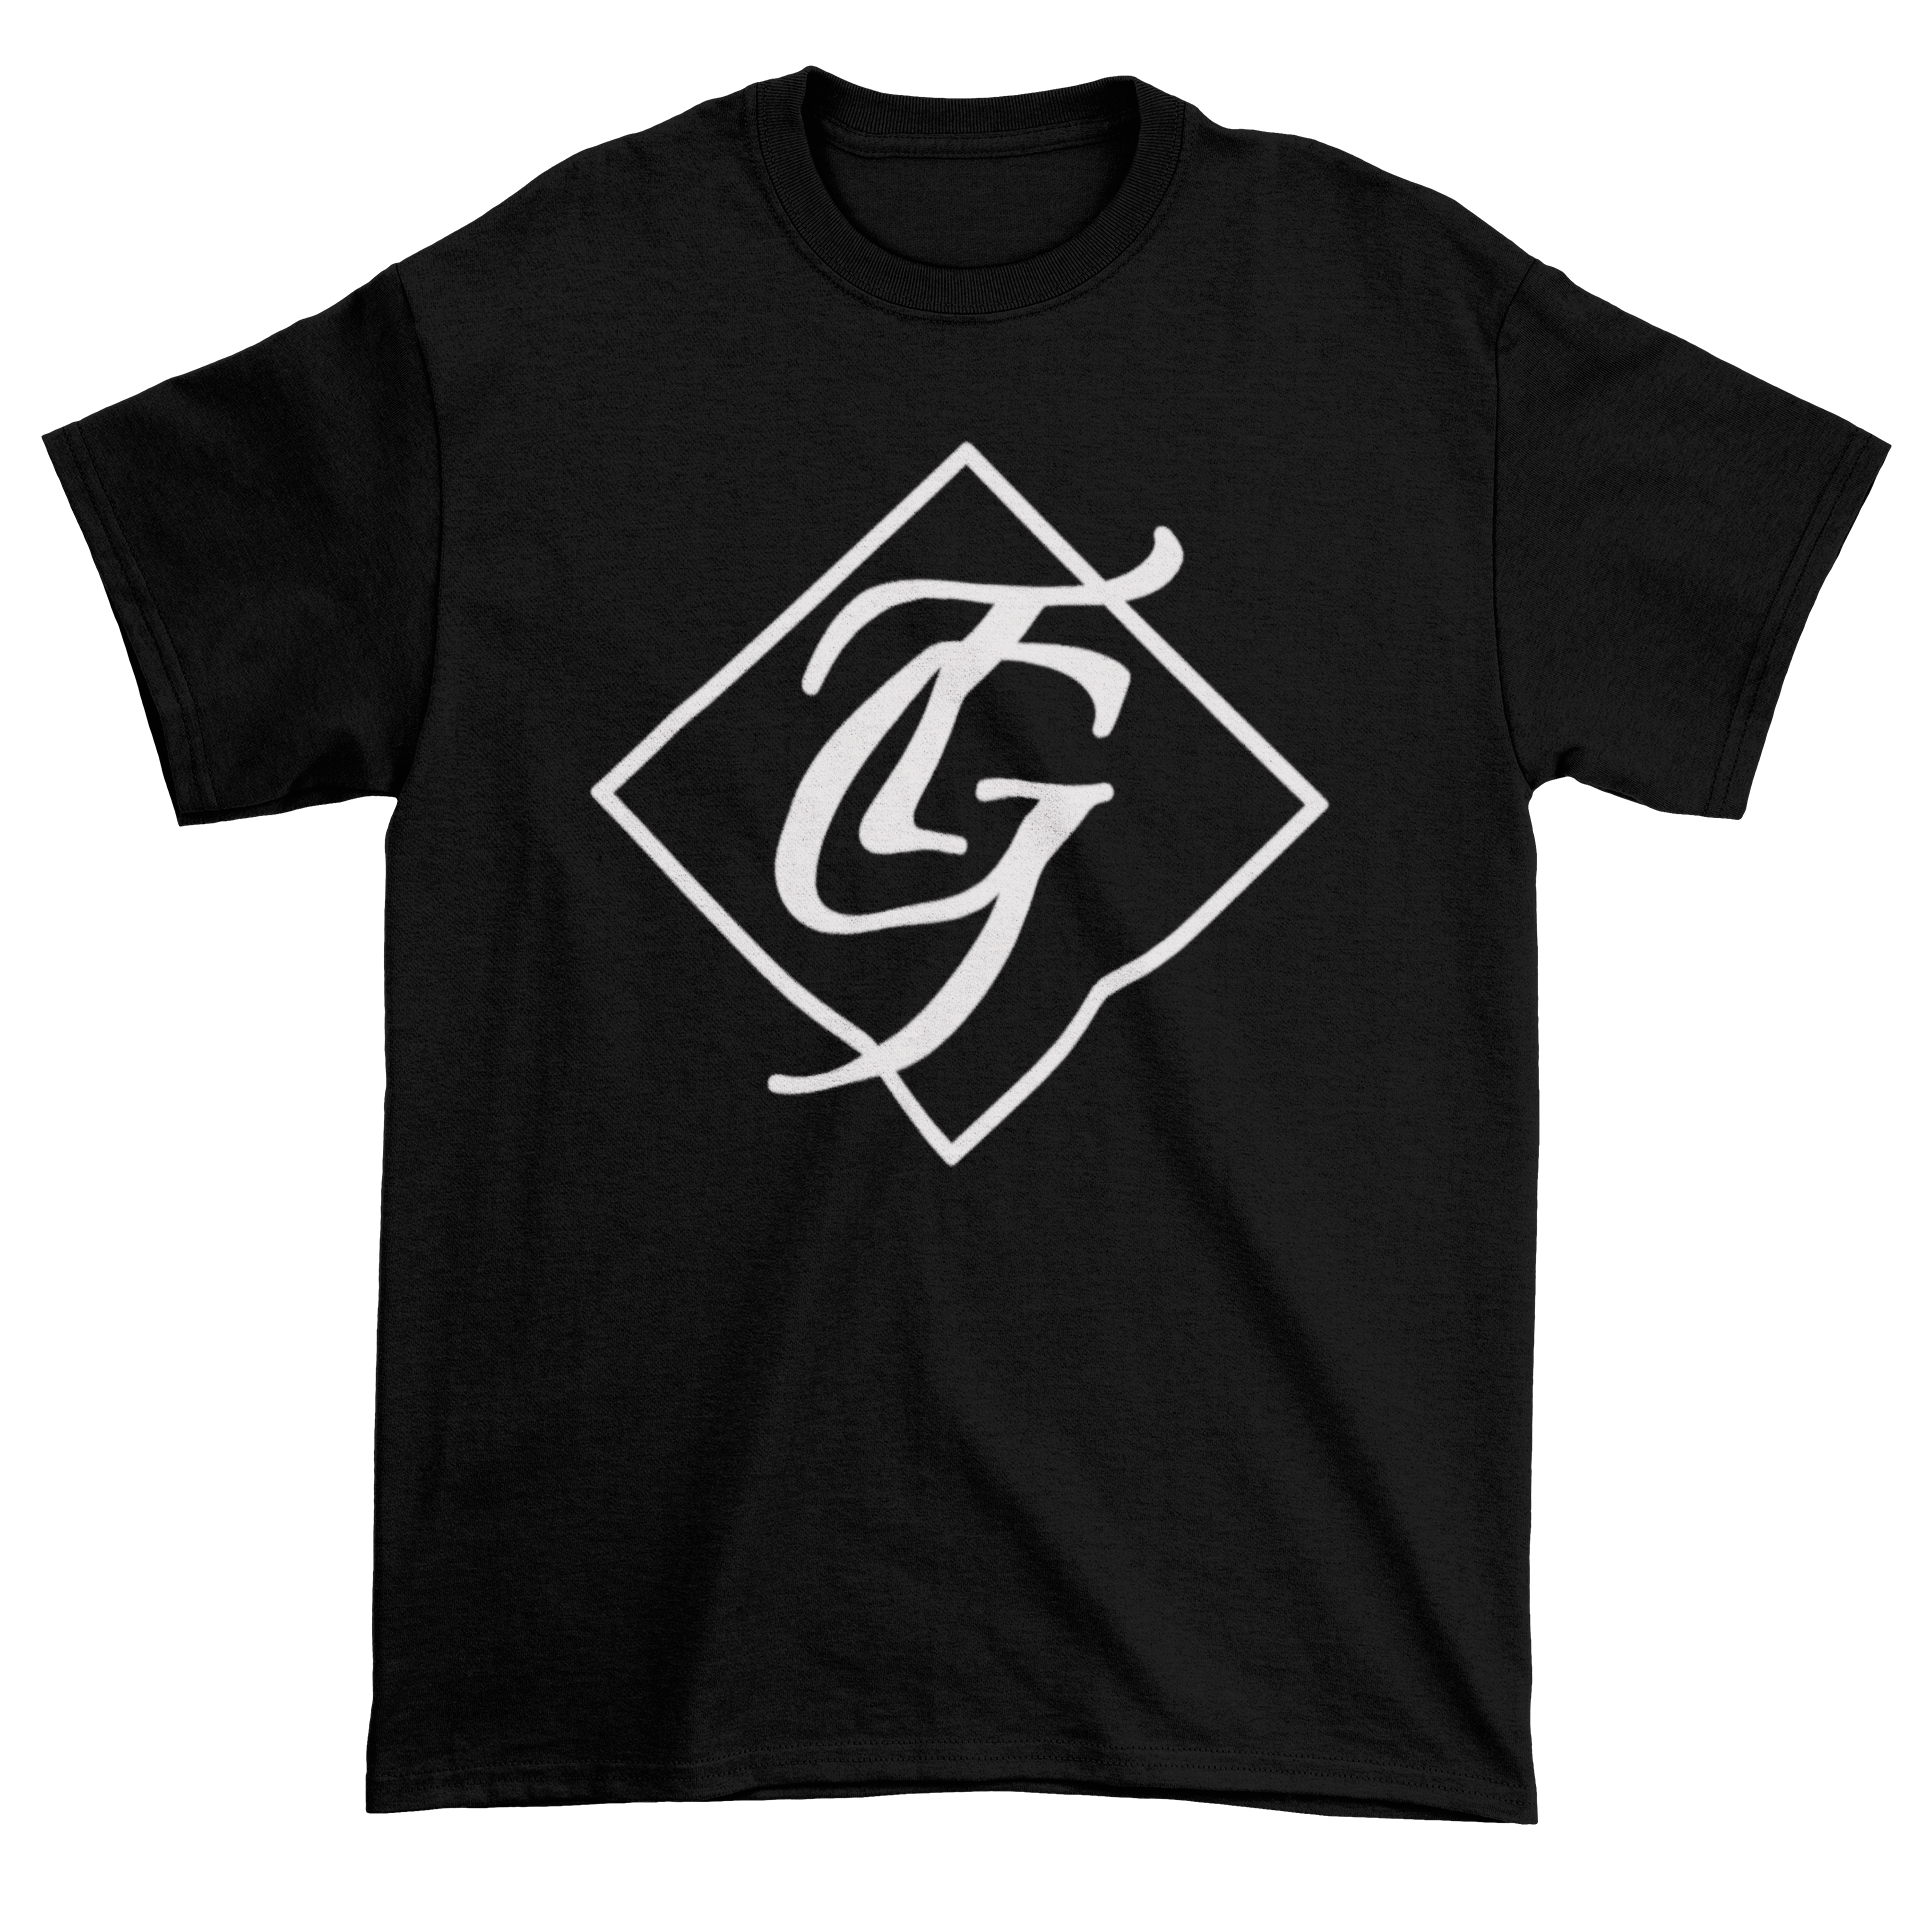 Official Logo Tee from Tony G of Nu-Image. - Drop Top Teez